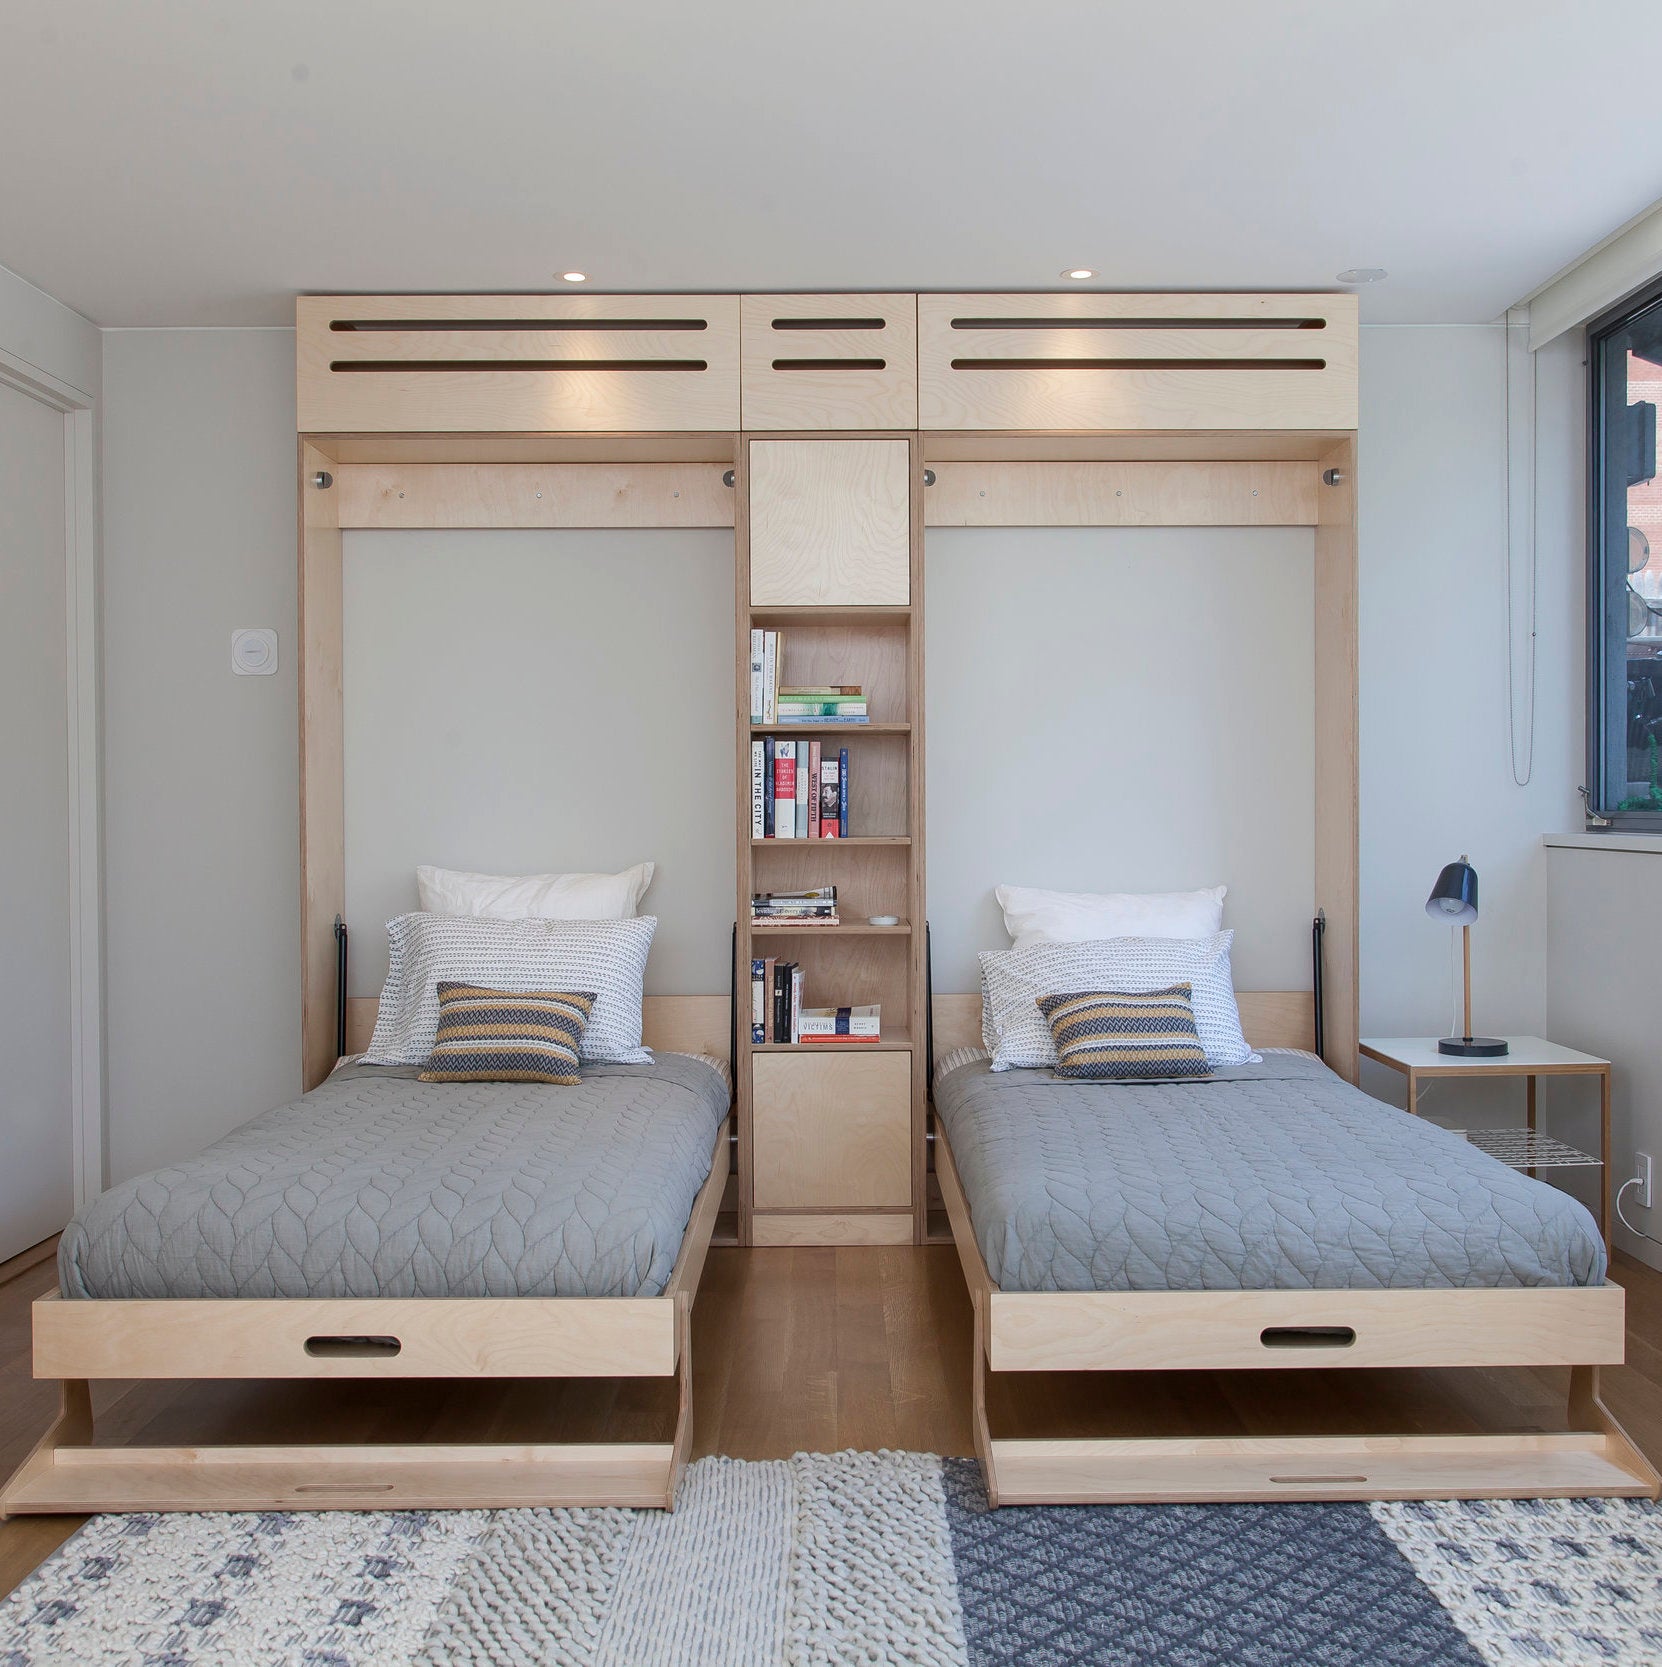 Modern minimalist bedroom with two twin beds that slide under a shared shelving unit, stylish and practical.